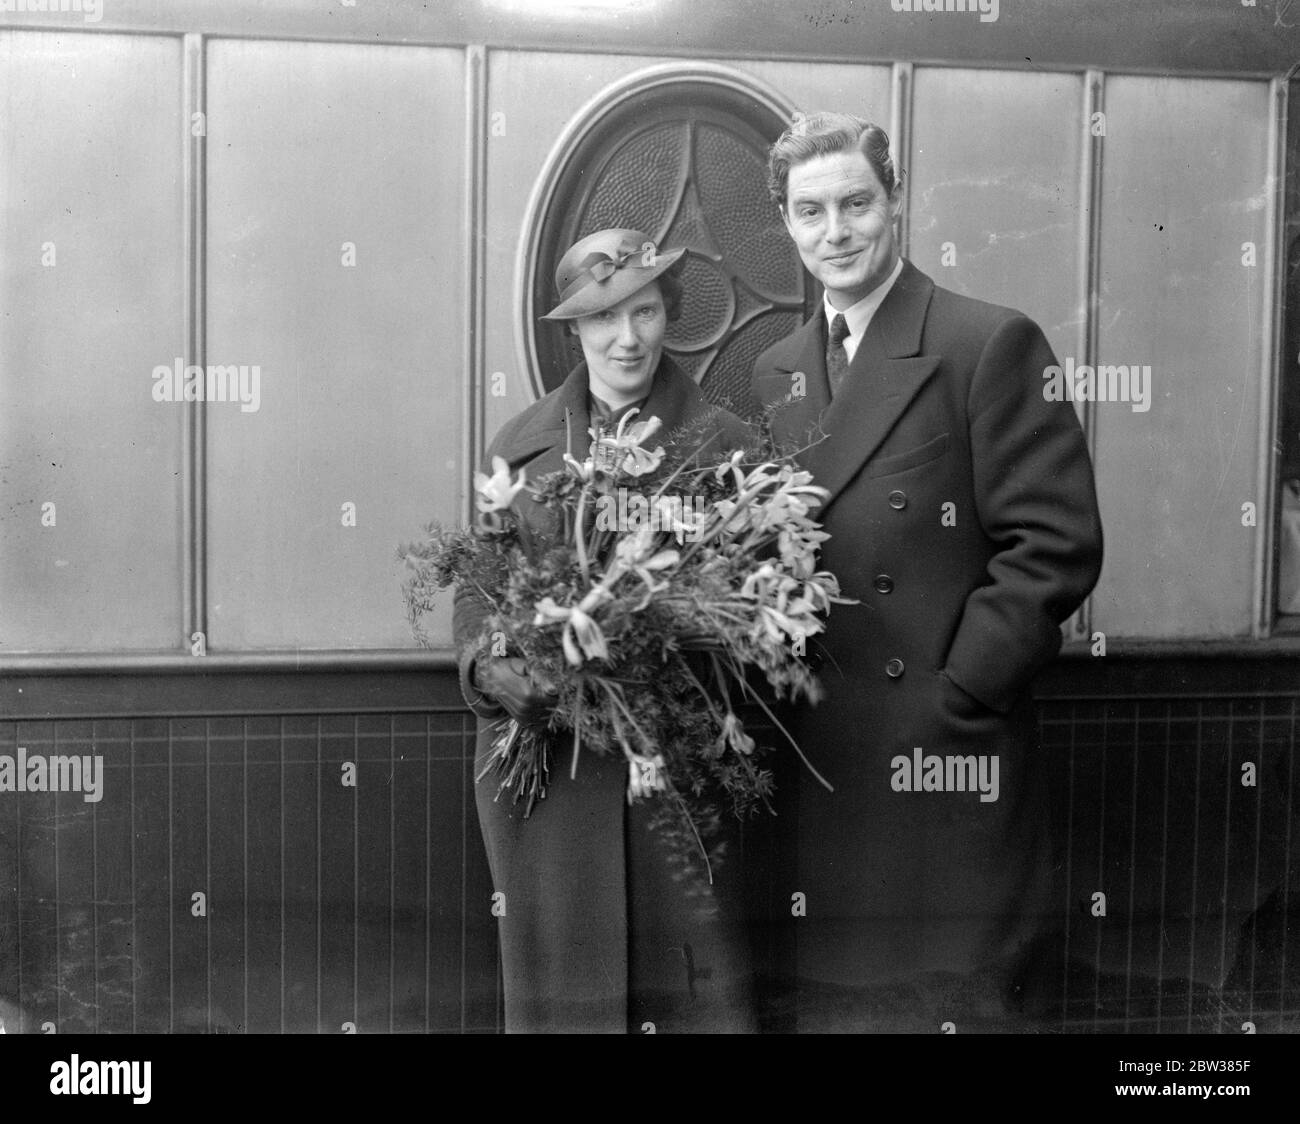 World famous woman ballet producer weds Viennese musician in London . Miss Margarete Wallman , one of the world ' s most famous ballet producers , was married at the Caxton Hall register office , London , to Mr Hugo Burghauser , a musician of the Vienna State Opera and president of the Vienna Philharmonic Orchestra . Miss Wallman is in charge of the ballet at Covent Garden this year . Photo shows the bride and groom . 5 May 1934 Stock Photo